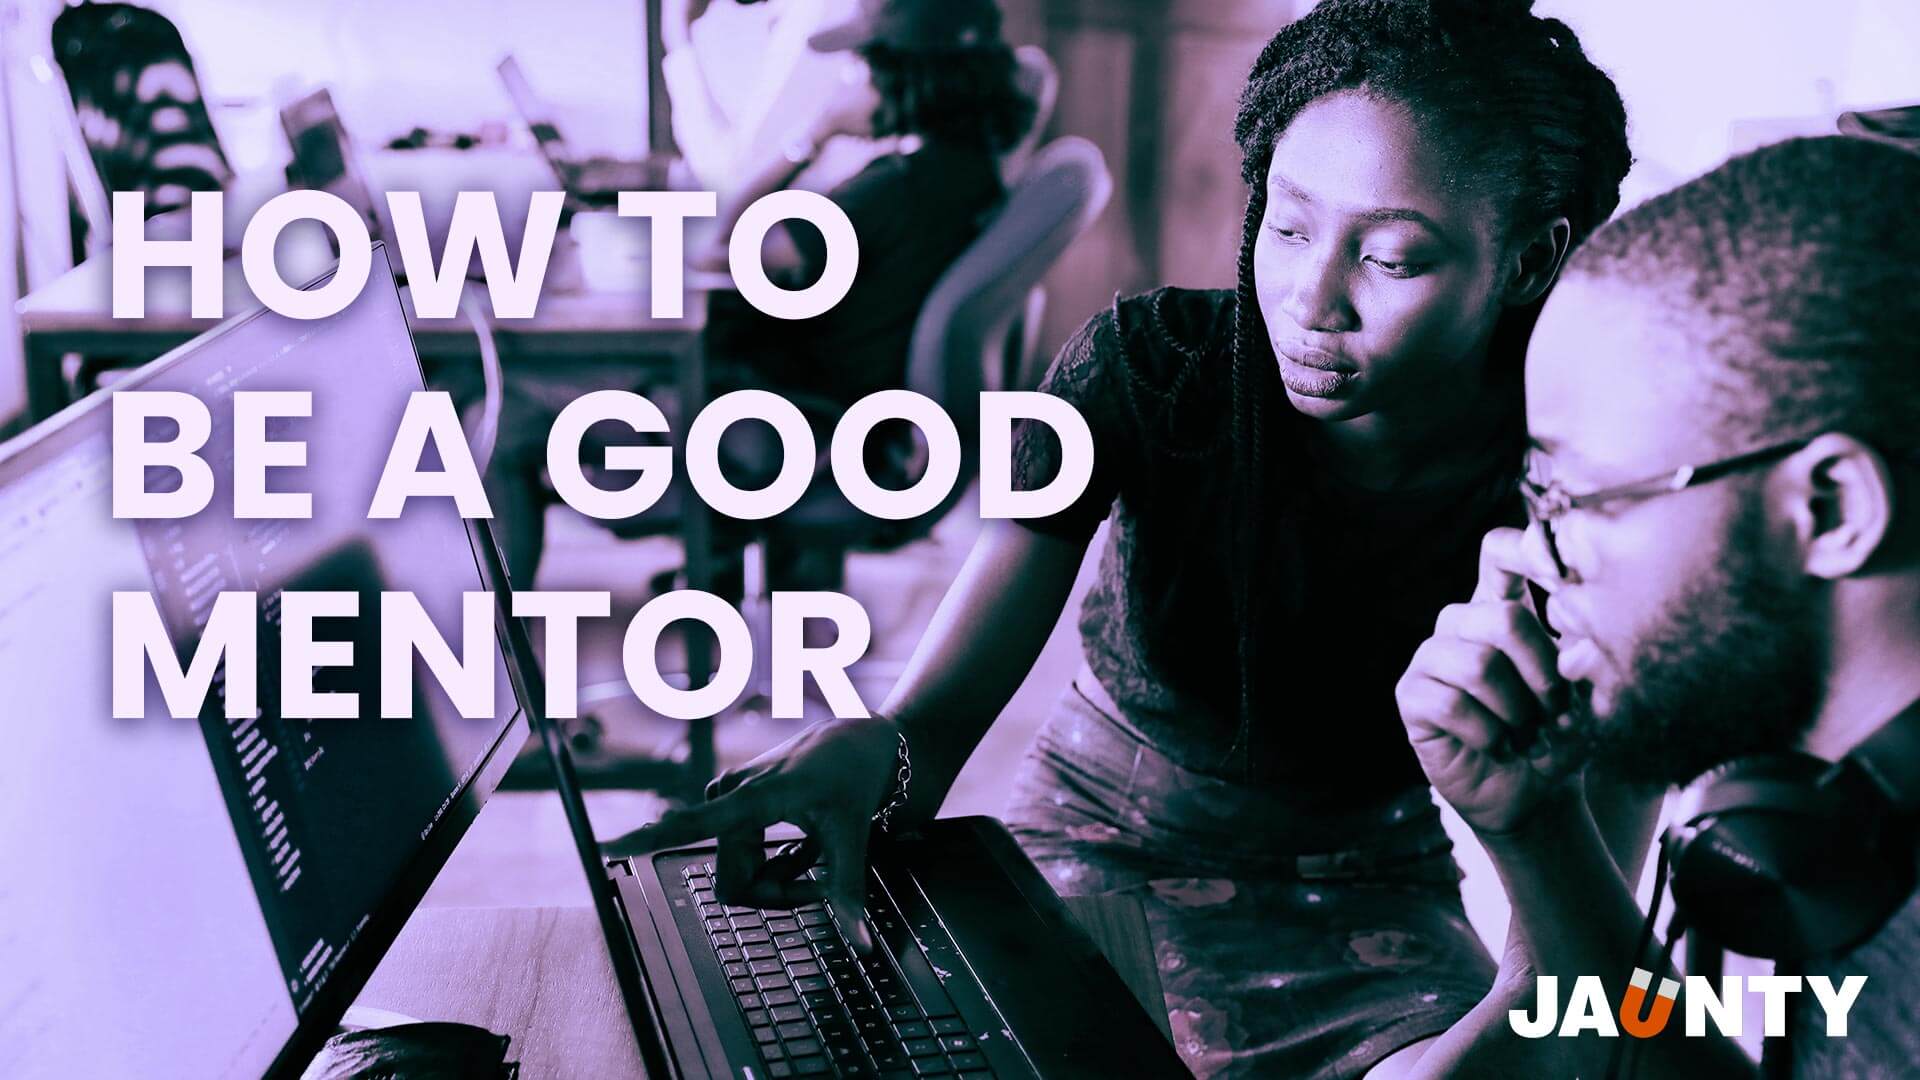 How to be a good mentor